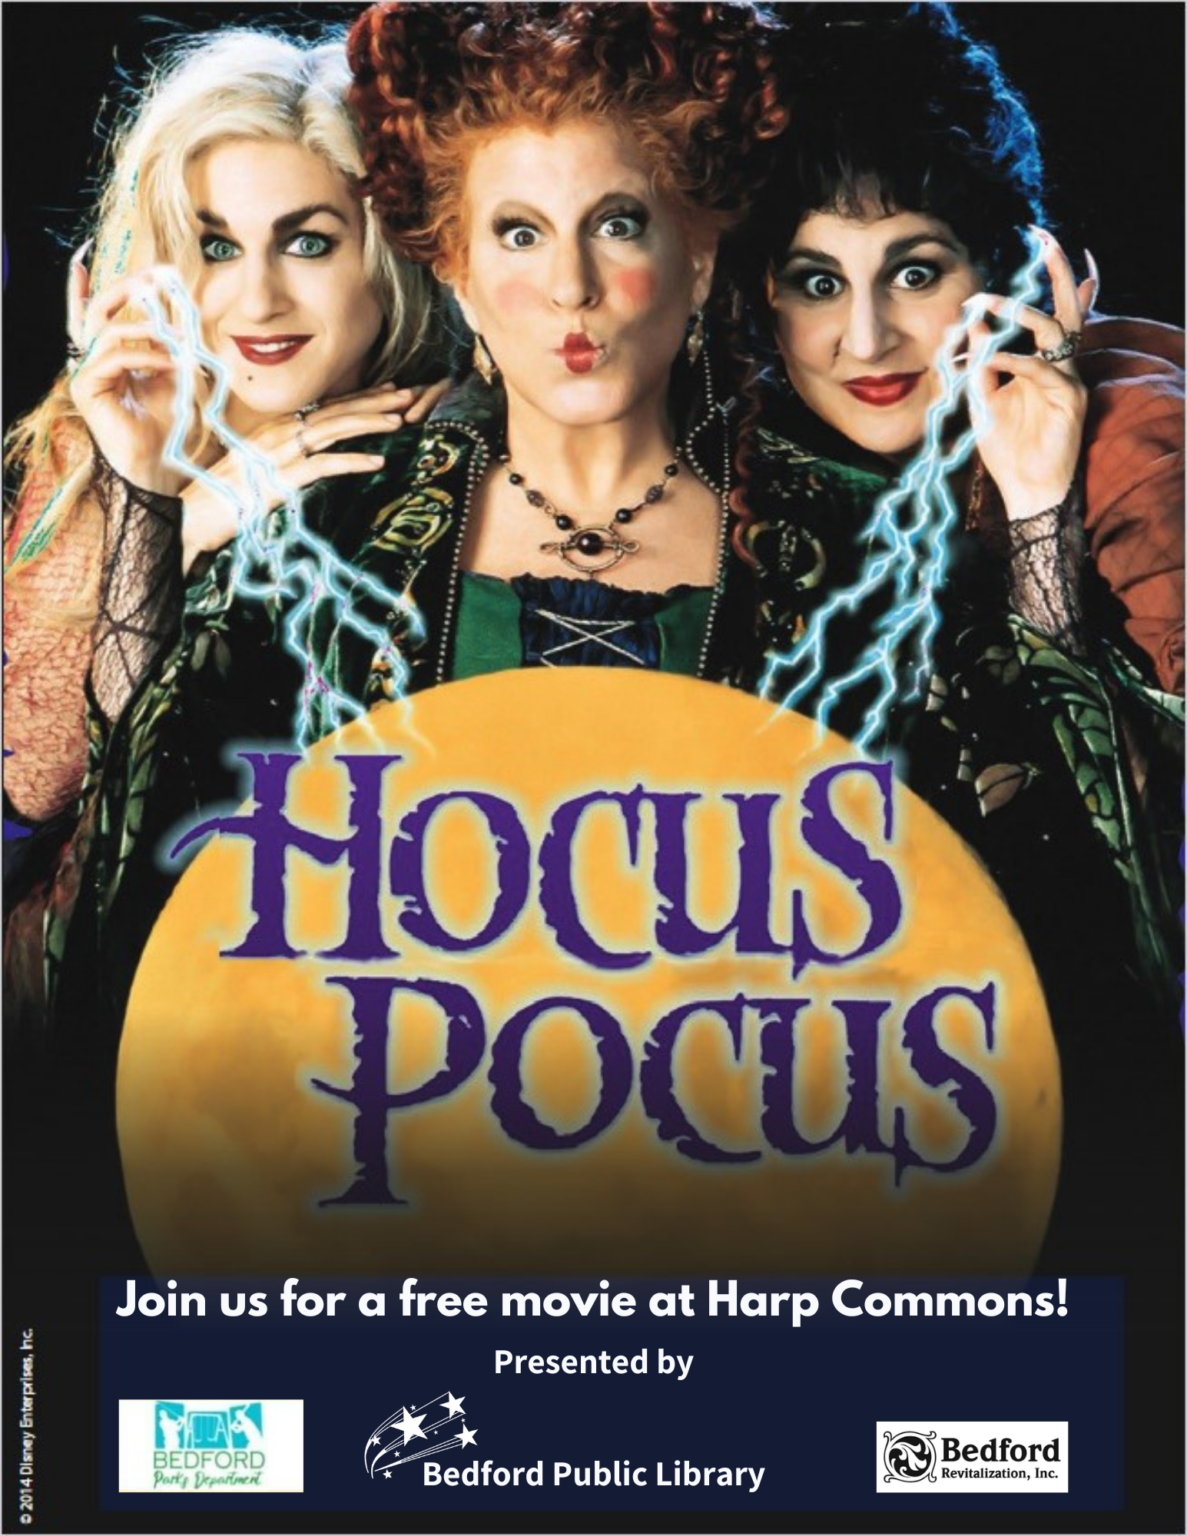 Free Movie at Harp Commons – Bedford